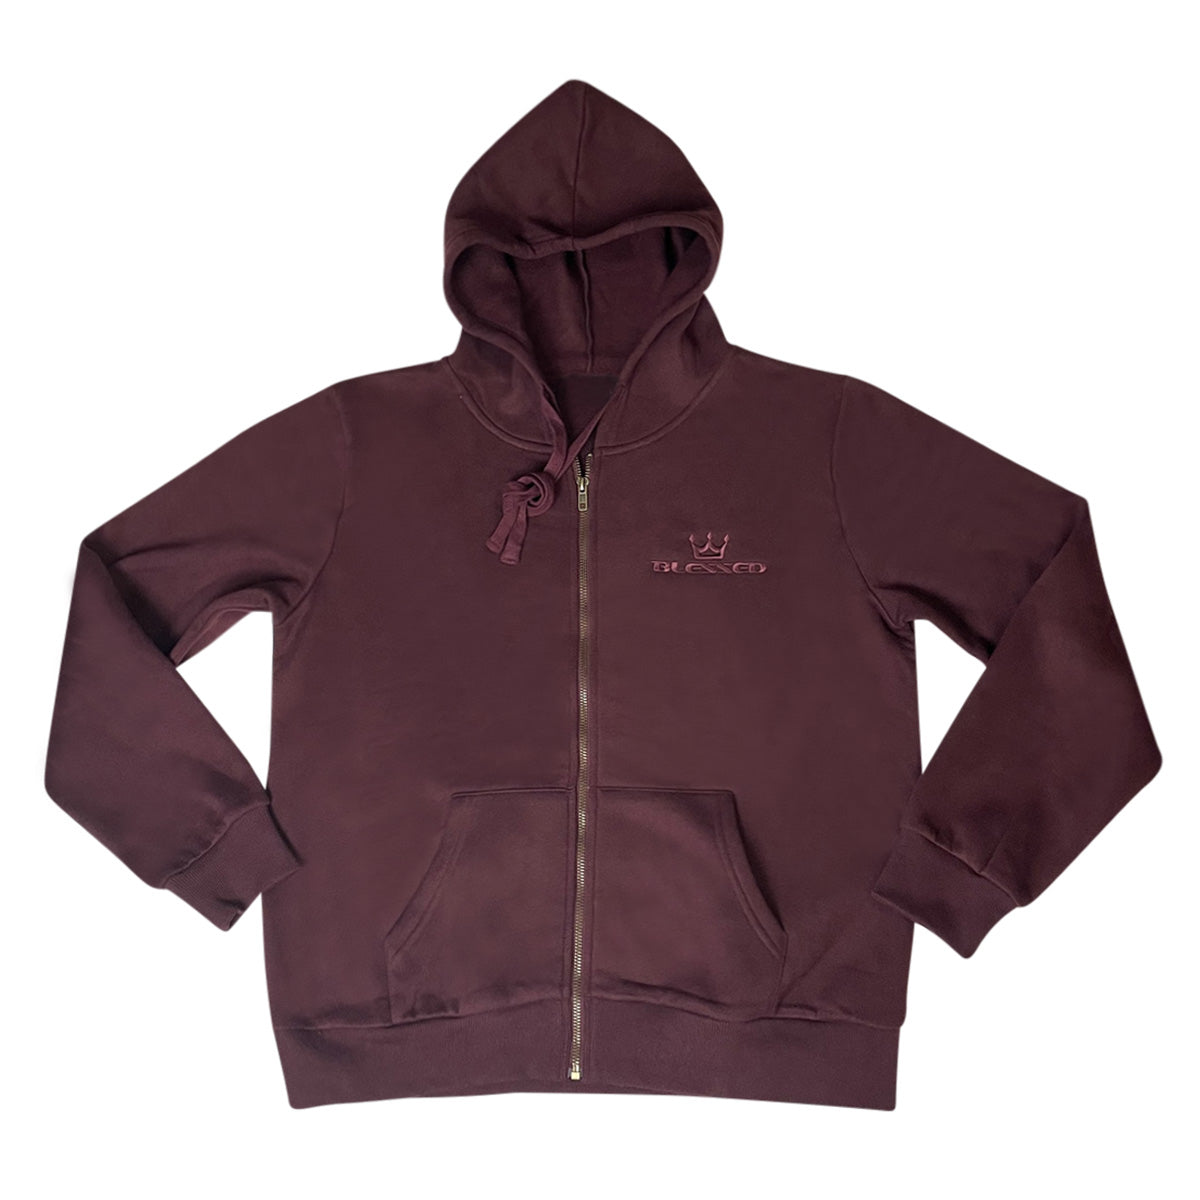 Blessed Zip Jackets